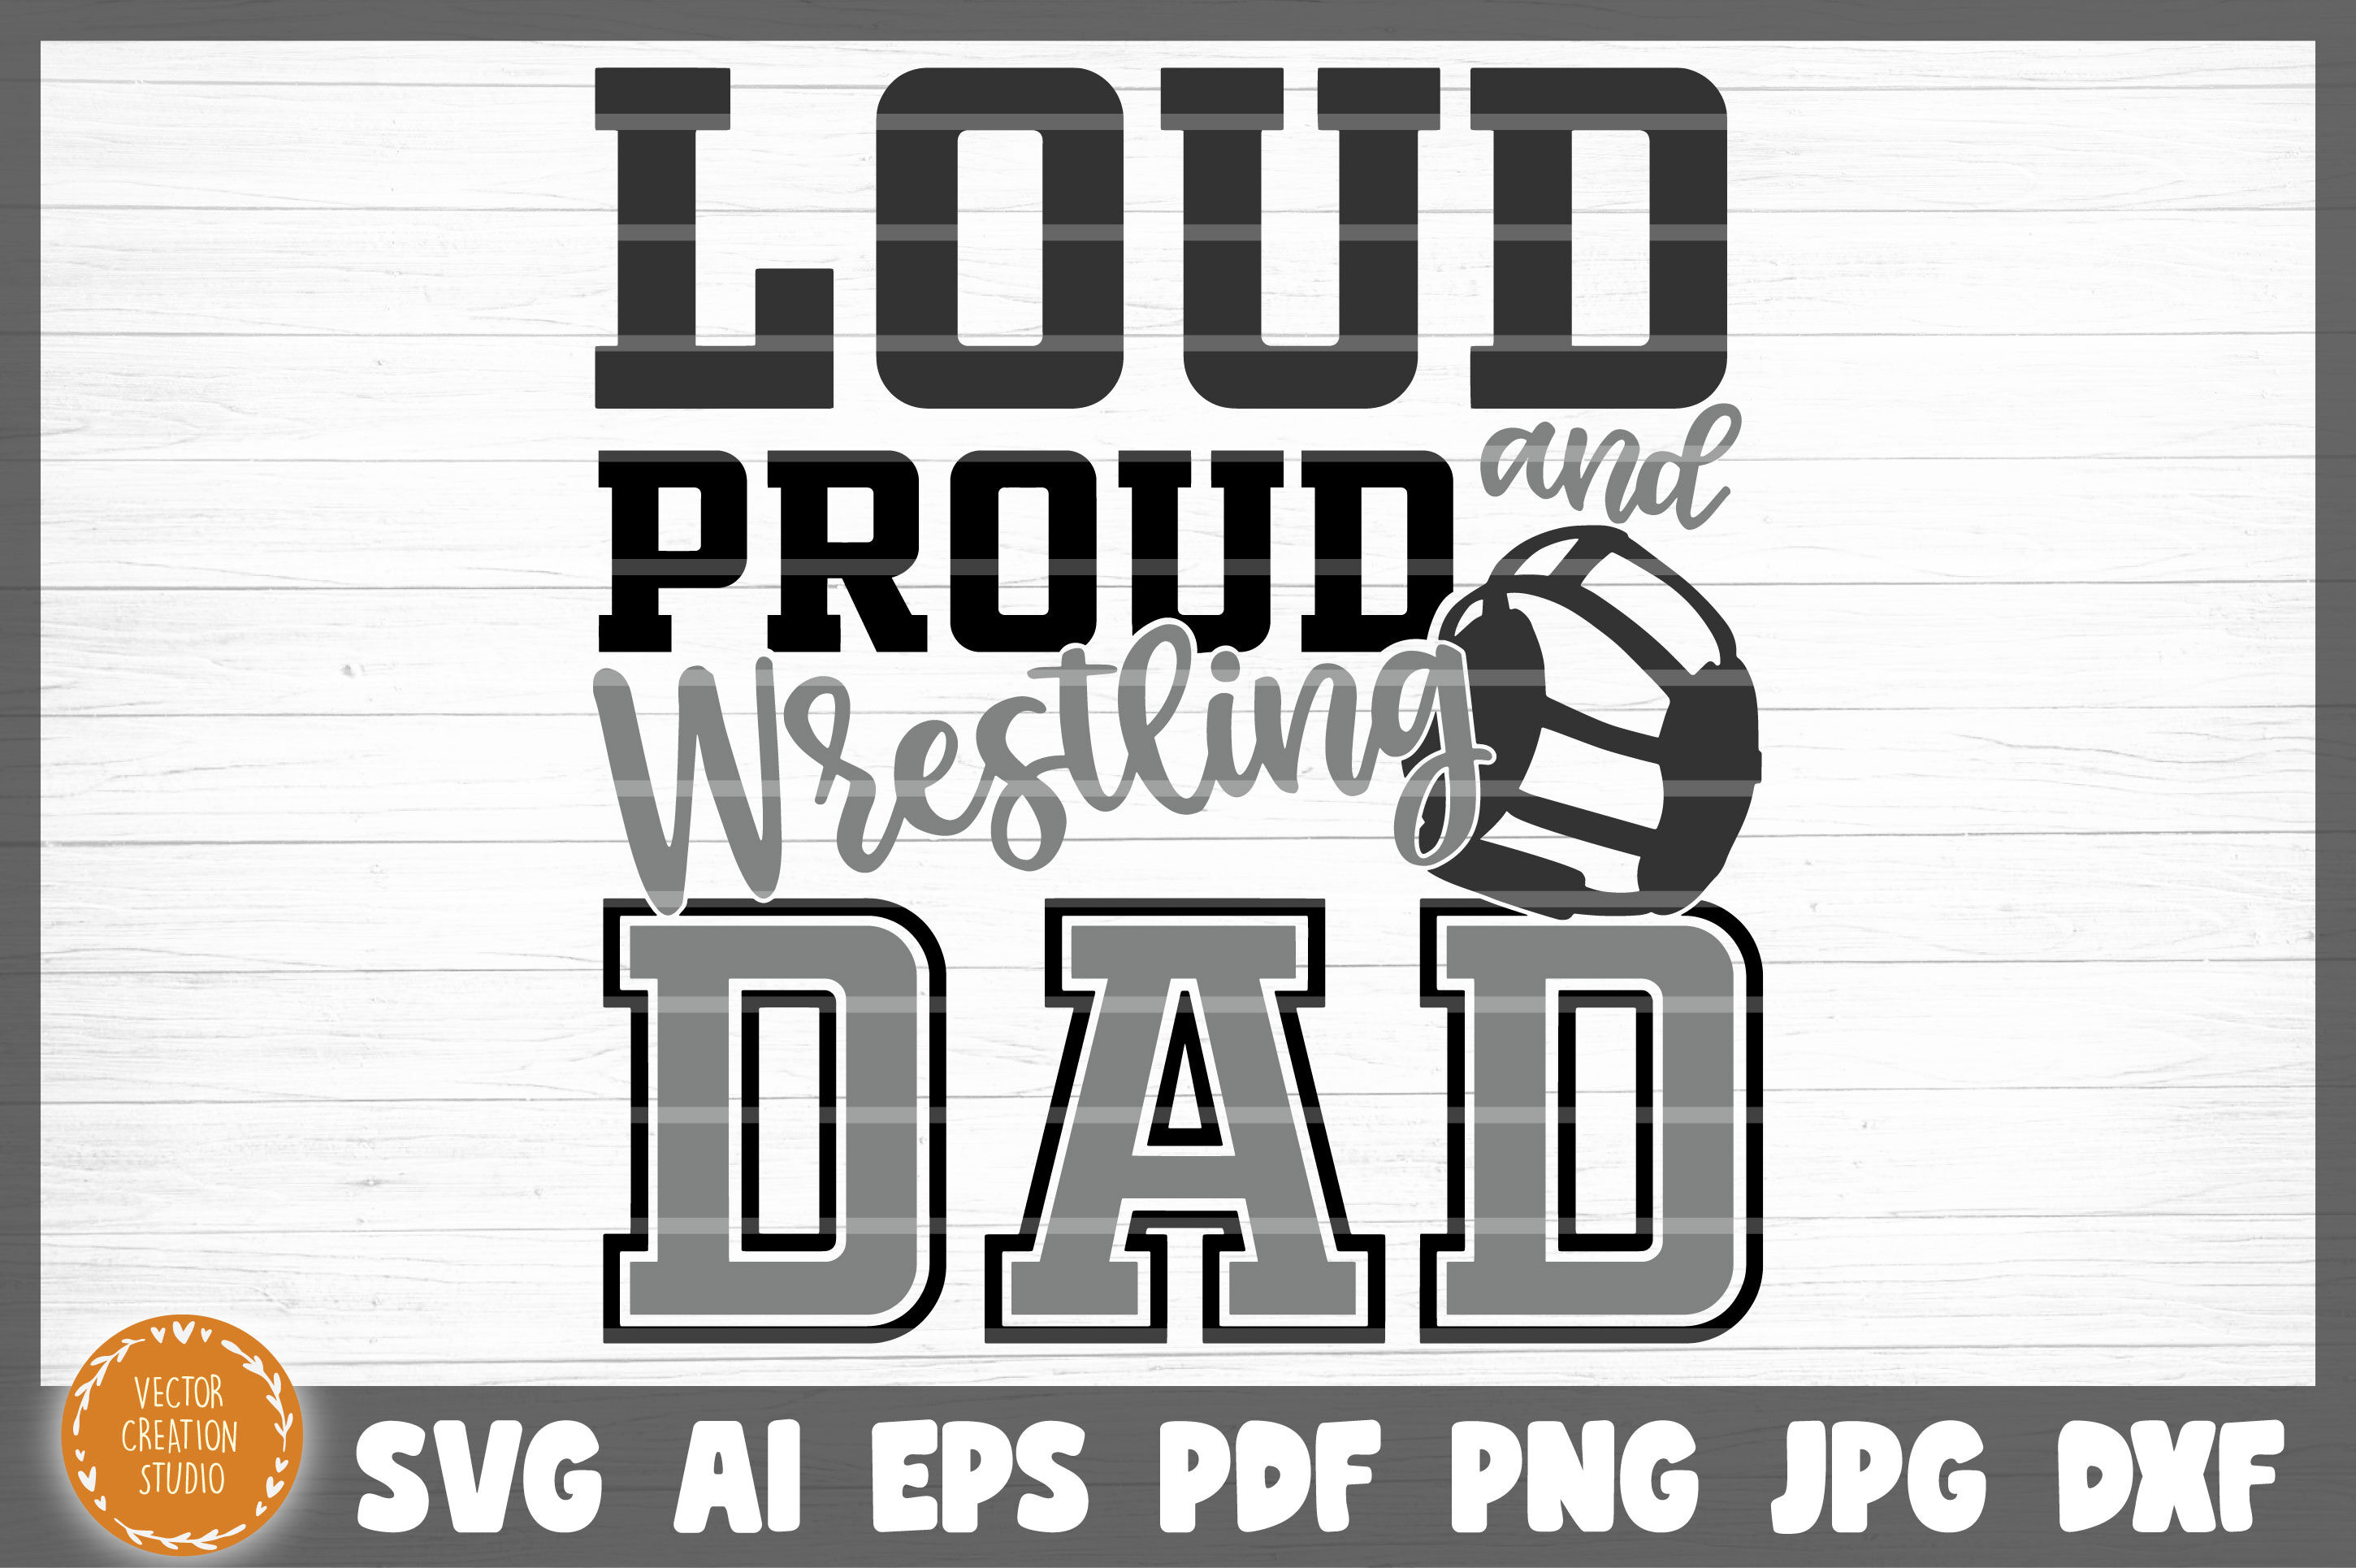 Download Loud And Proud Wrestling Dad Svg Cut File By Vectorcreationstudio Thehungryjpeg Com